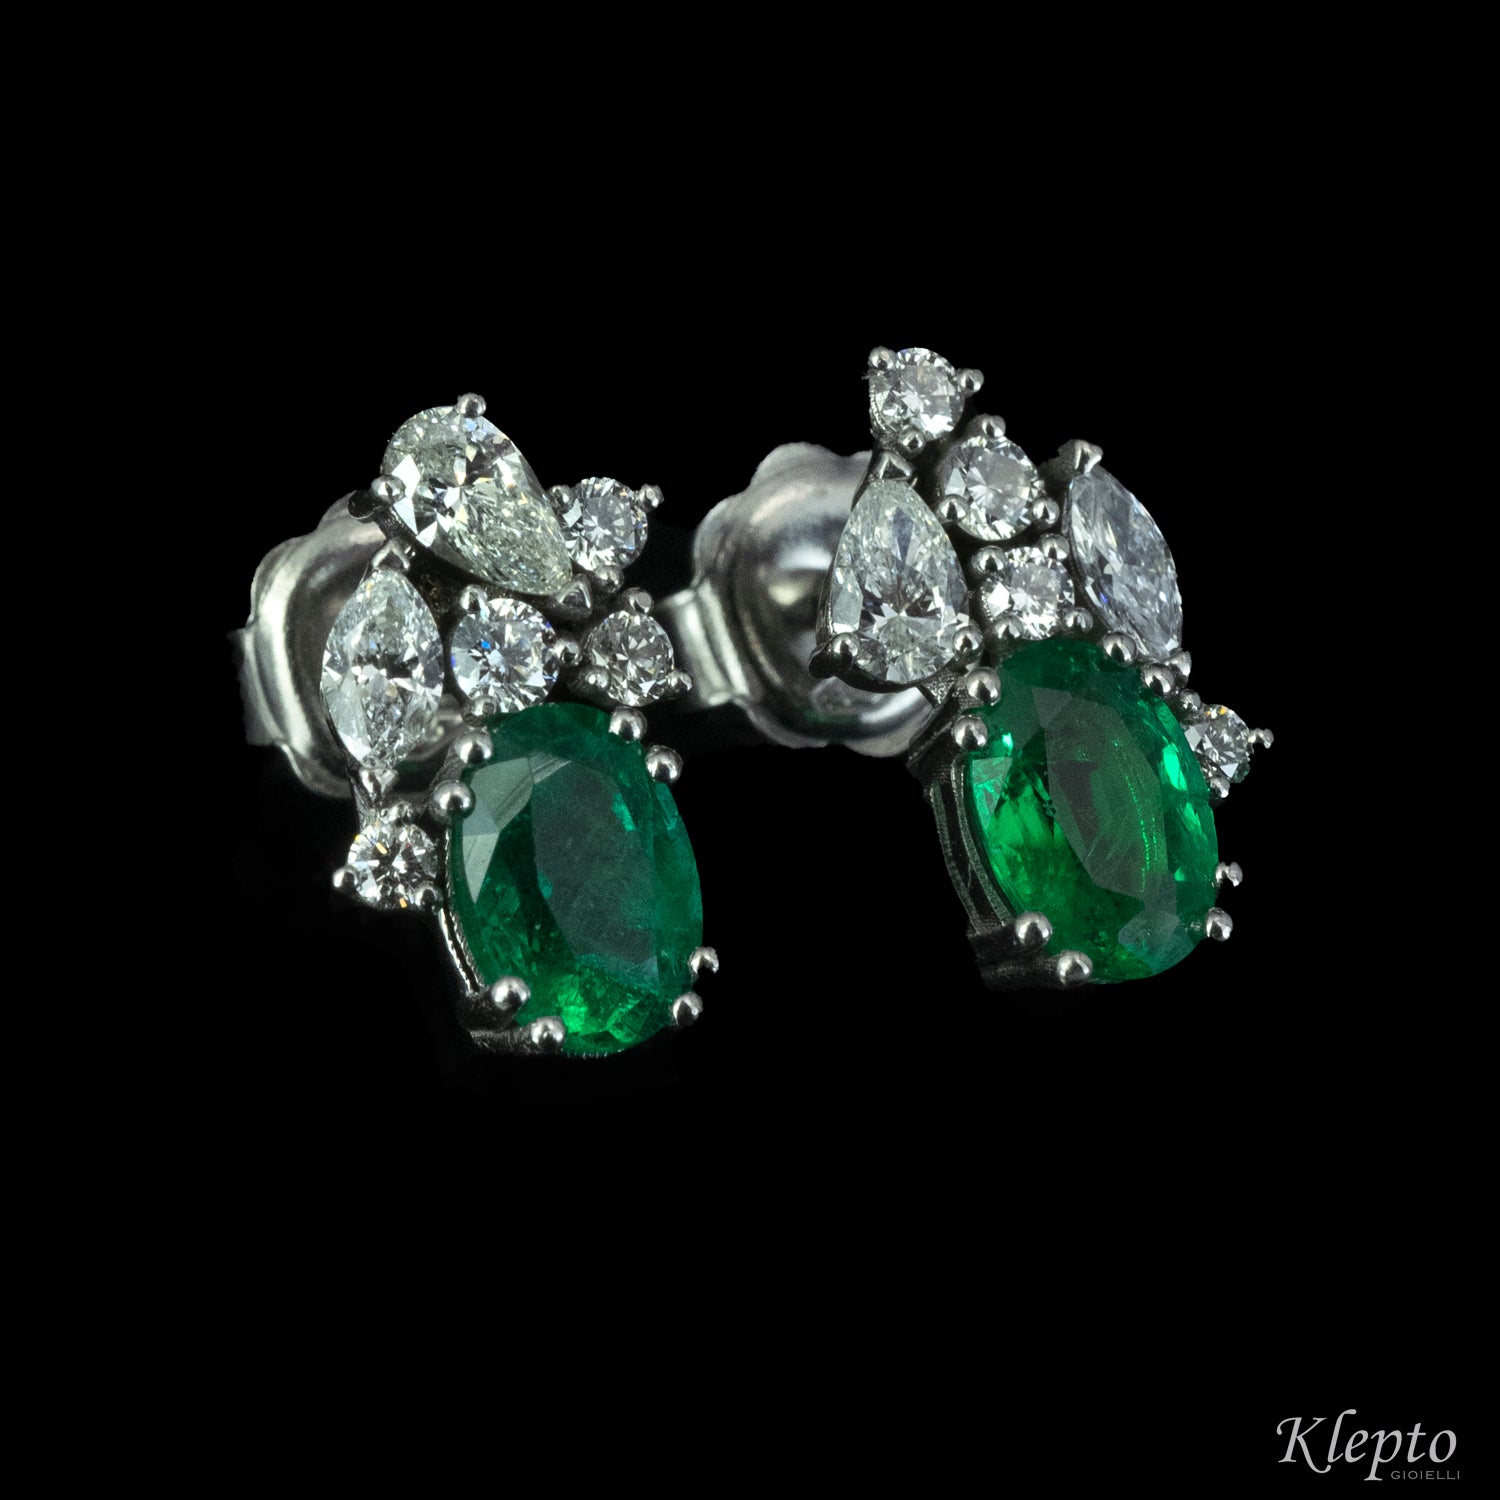 White gold earrings with emeralds and fancy cut diamonds